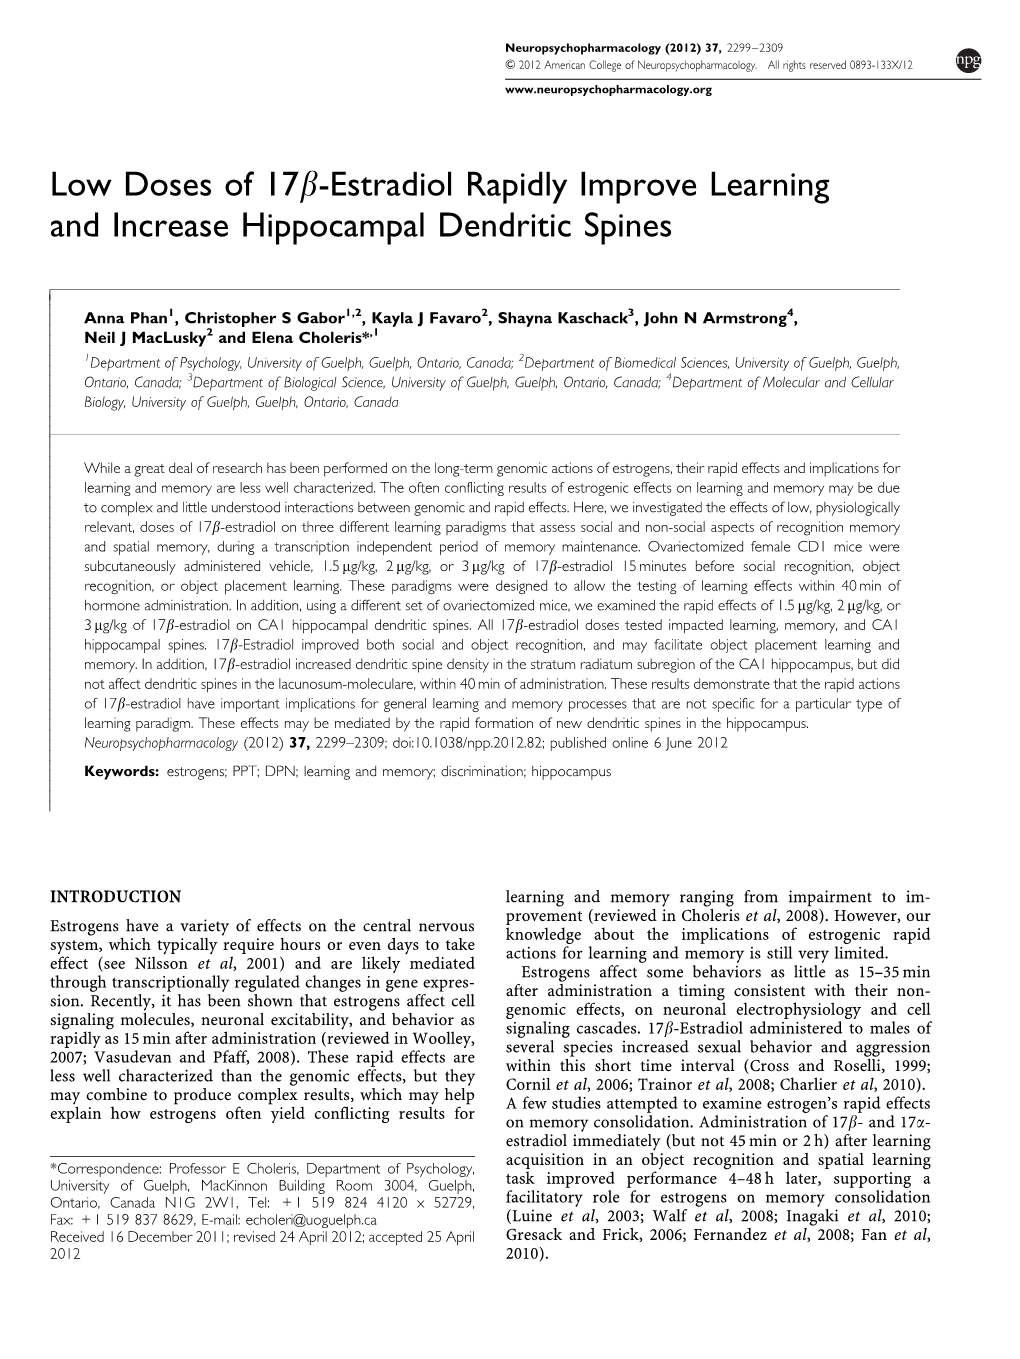 Estradiol Rapidly Improve Learning and Increase Hippocampal Dendritic Spines